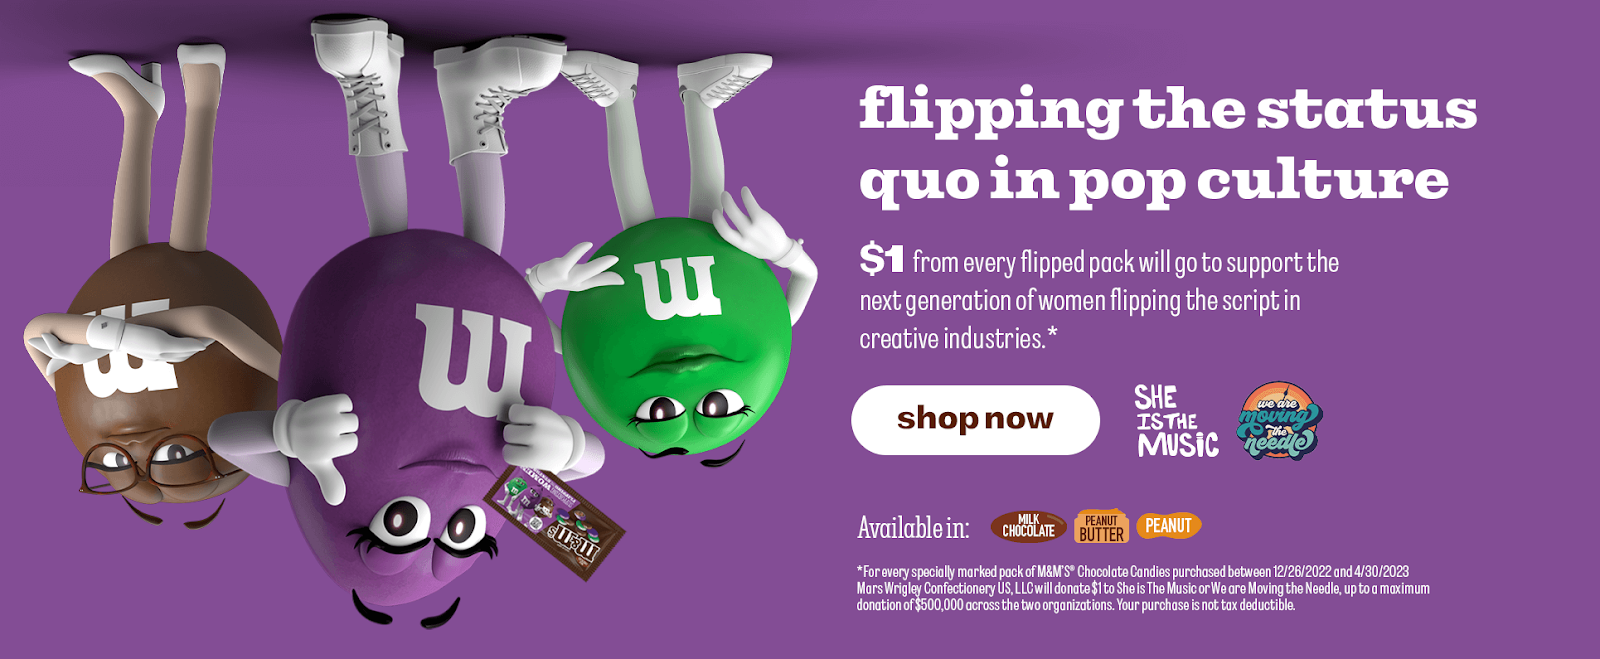 M&M's Spotlights Women 'flipping The Status Quo' With New Purple Character